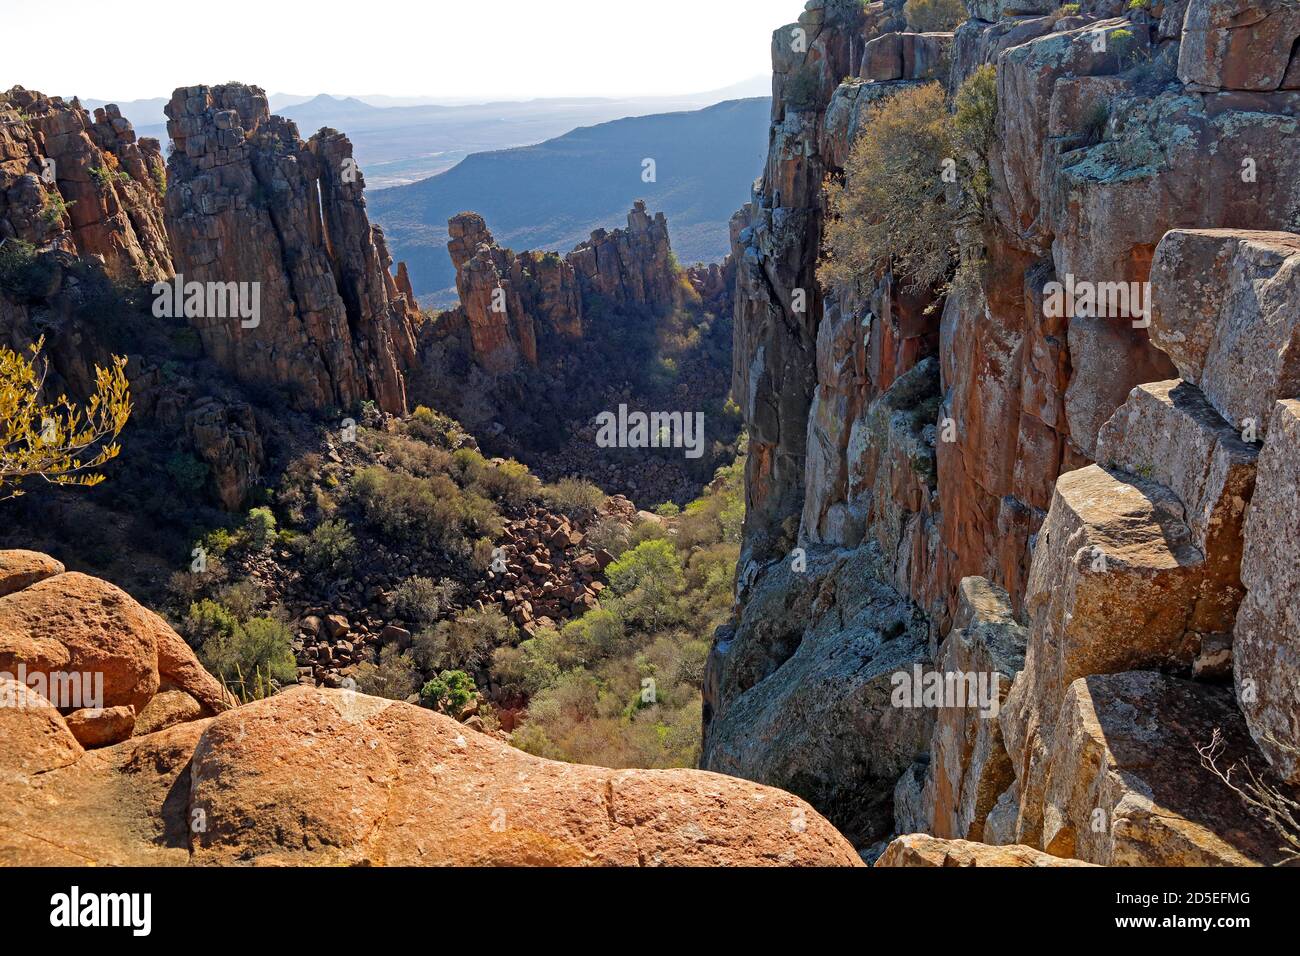 Landscape view of the scenic Valley of desolation, Camdeboo National Park, South Africa Stock Photo